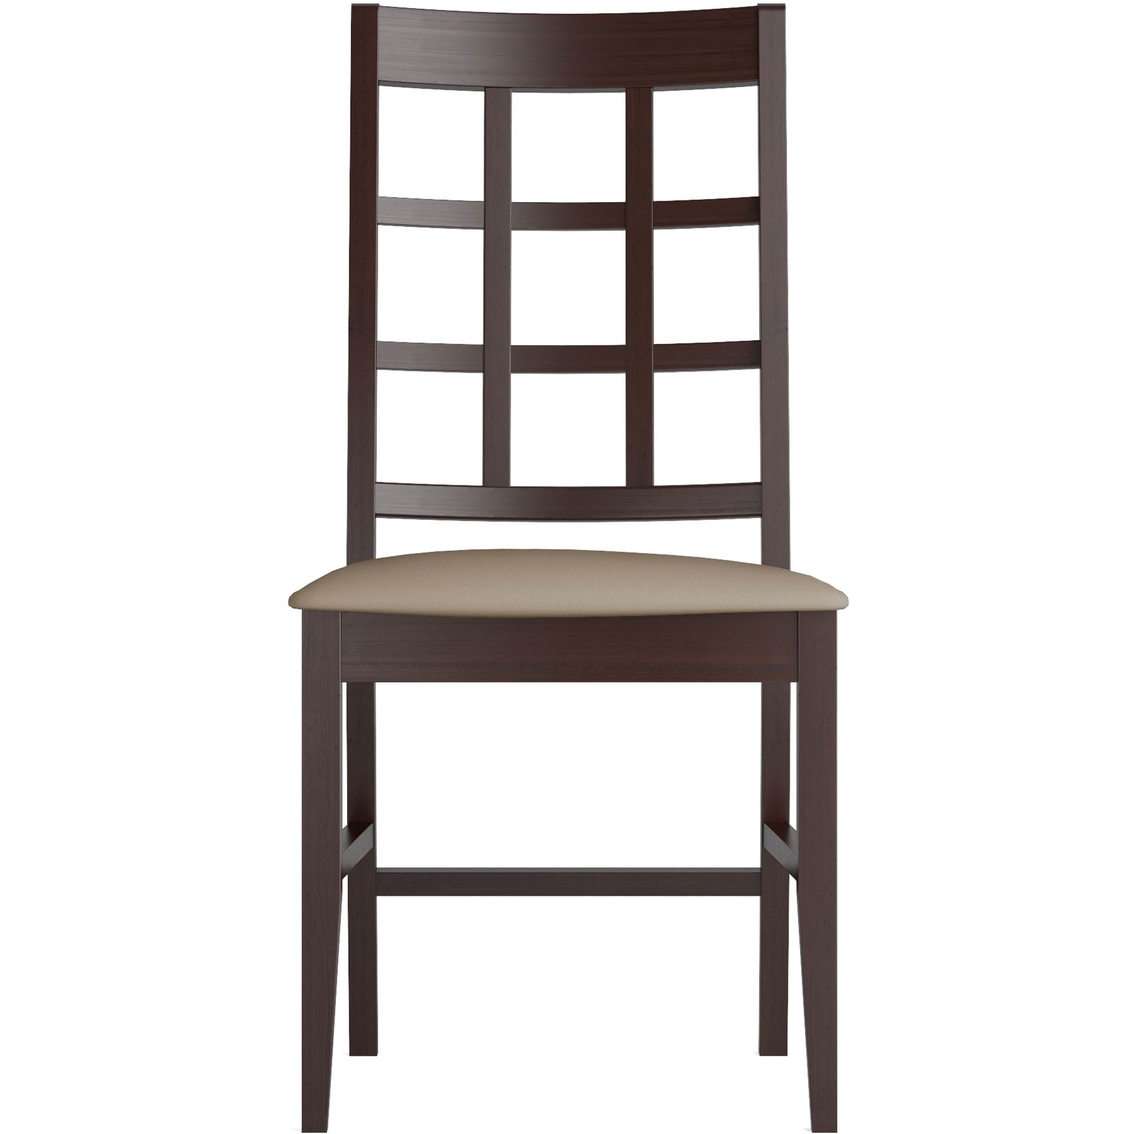 CorLiving Atwood Dining Chairs with Leatherette Seat 2 pk. - Image 2 of 4